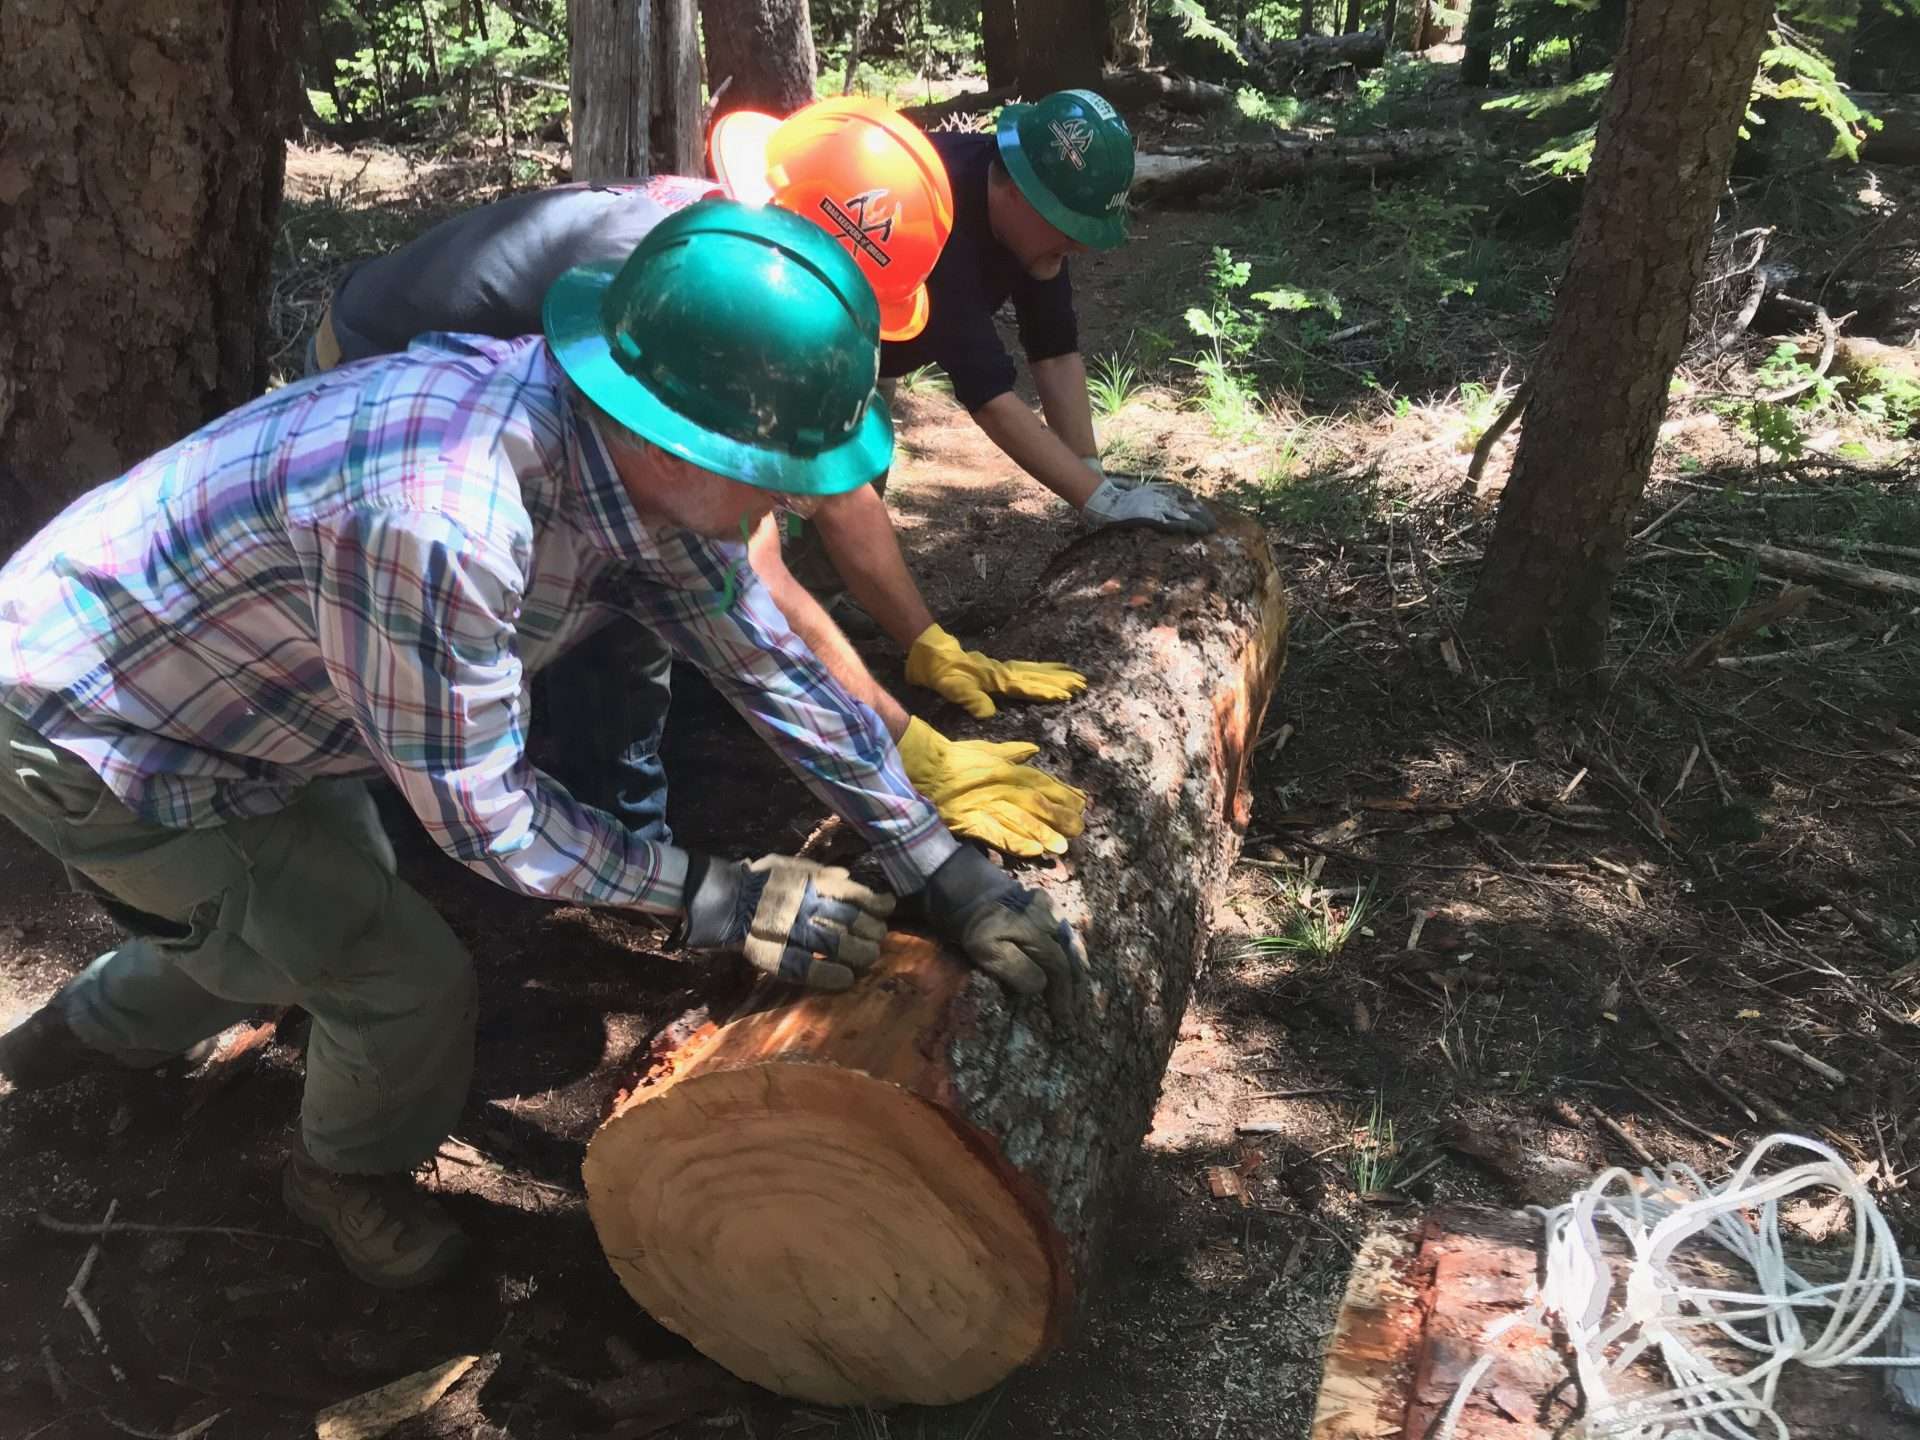 Three hard-hatted people crouch side by side with their hands on a cut section of log.